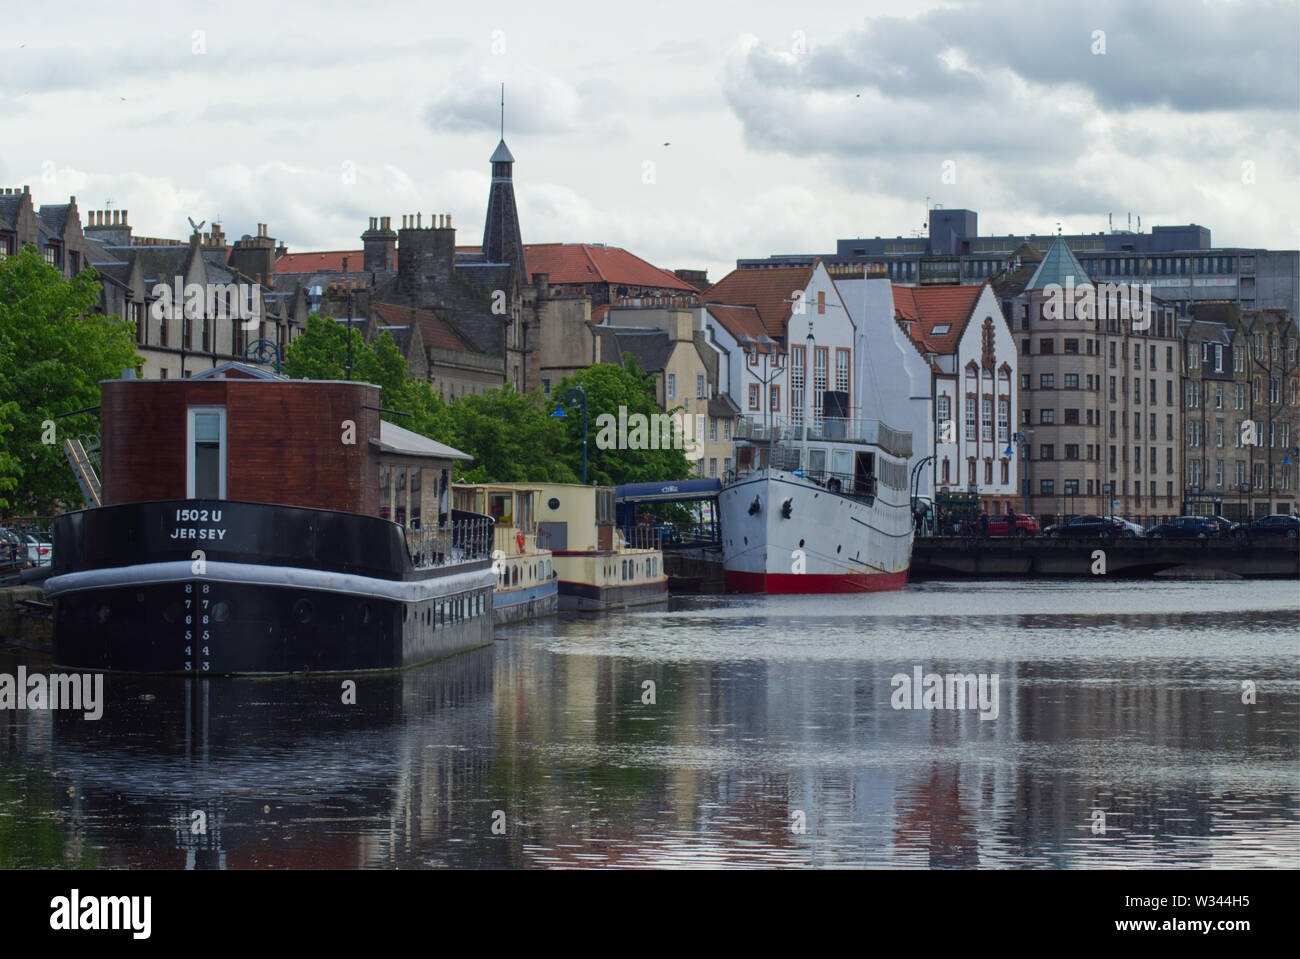 Edinburgh, Scotland / UK : May 26 2019: Barges are docked in area of Leith, Edinburgh, called the 'Shore'. Stock Photo